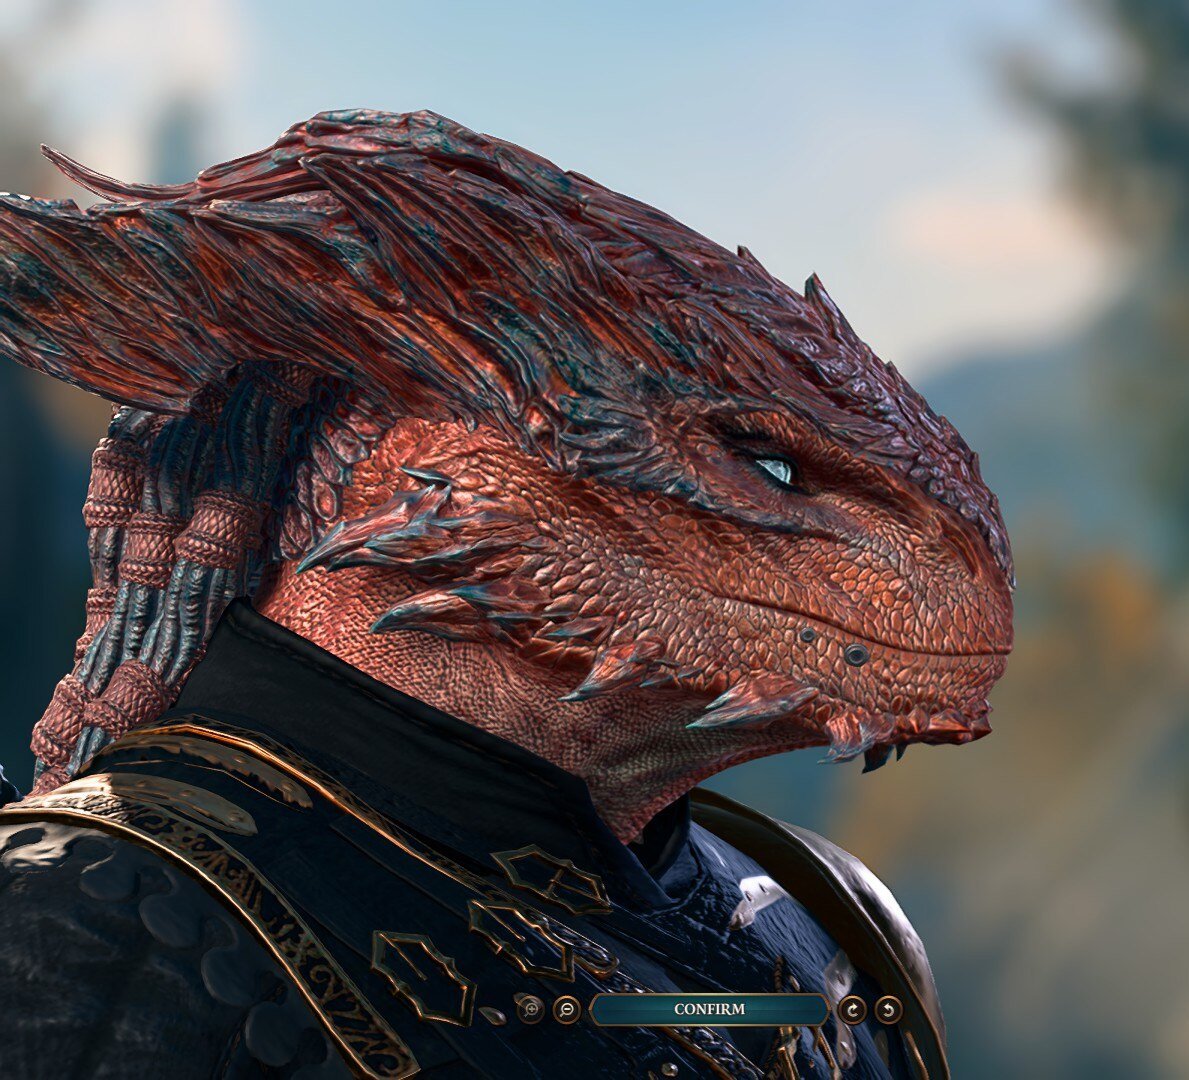 Everyone meet my pretty copper dragonborn for a multi-player run with some pals. They're a Ranger with deeply questionable morals, named Qes.